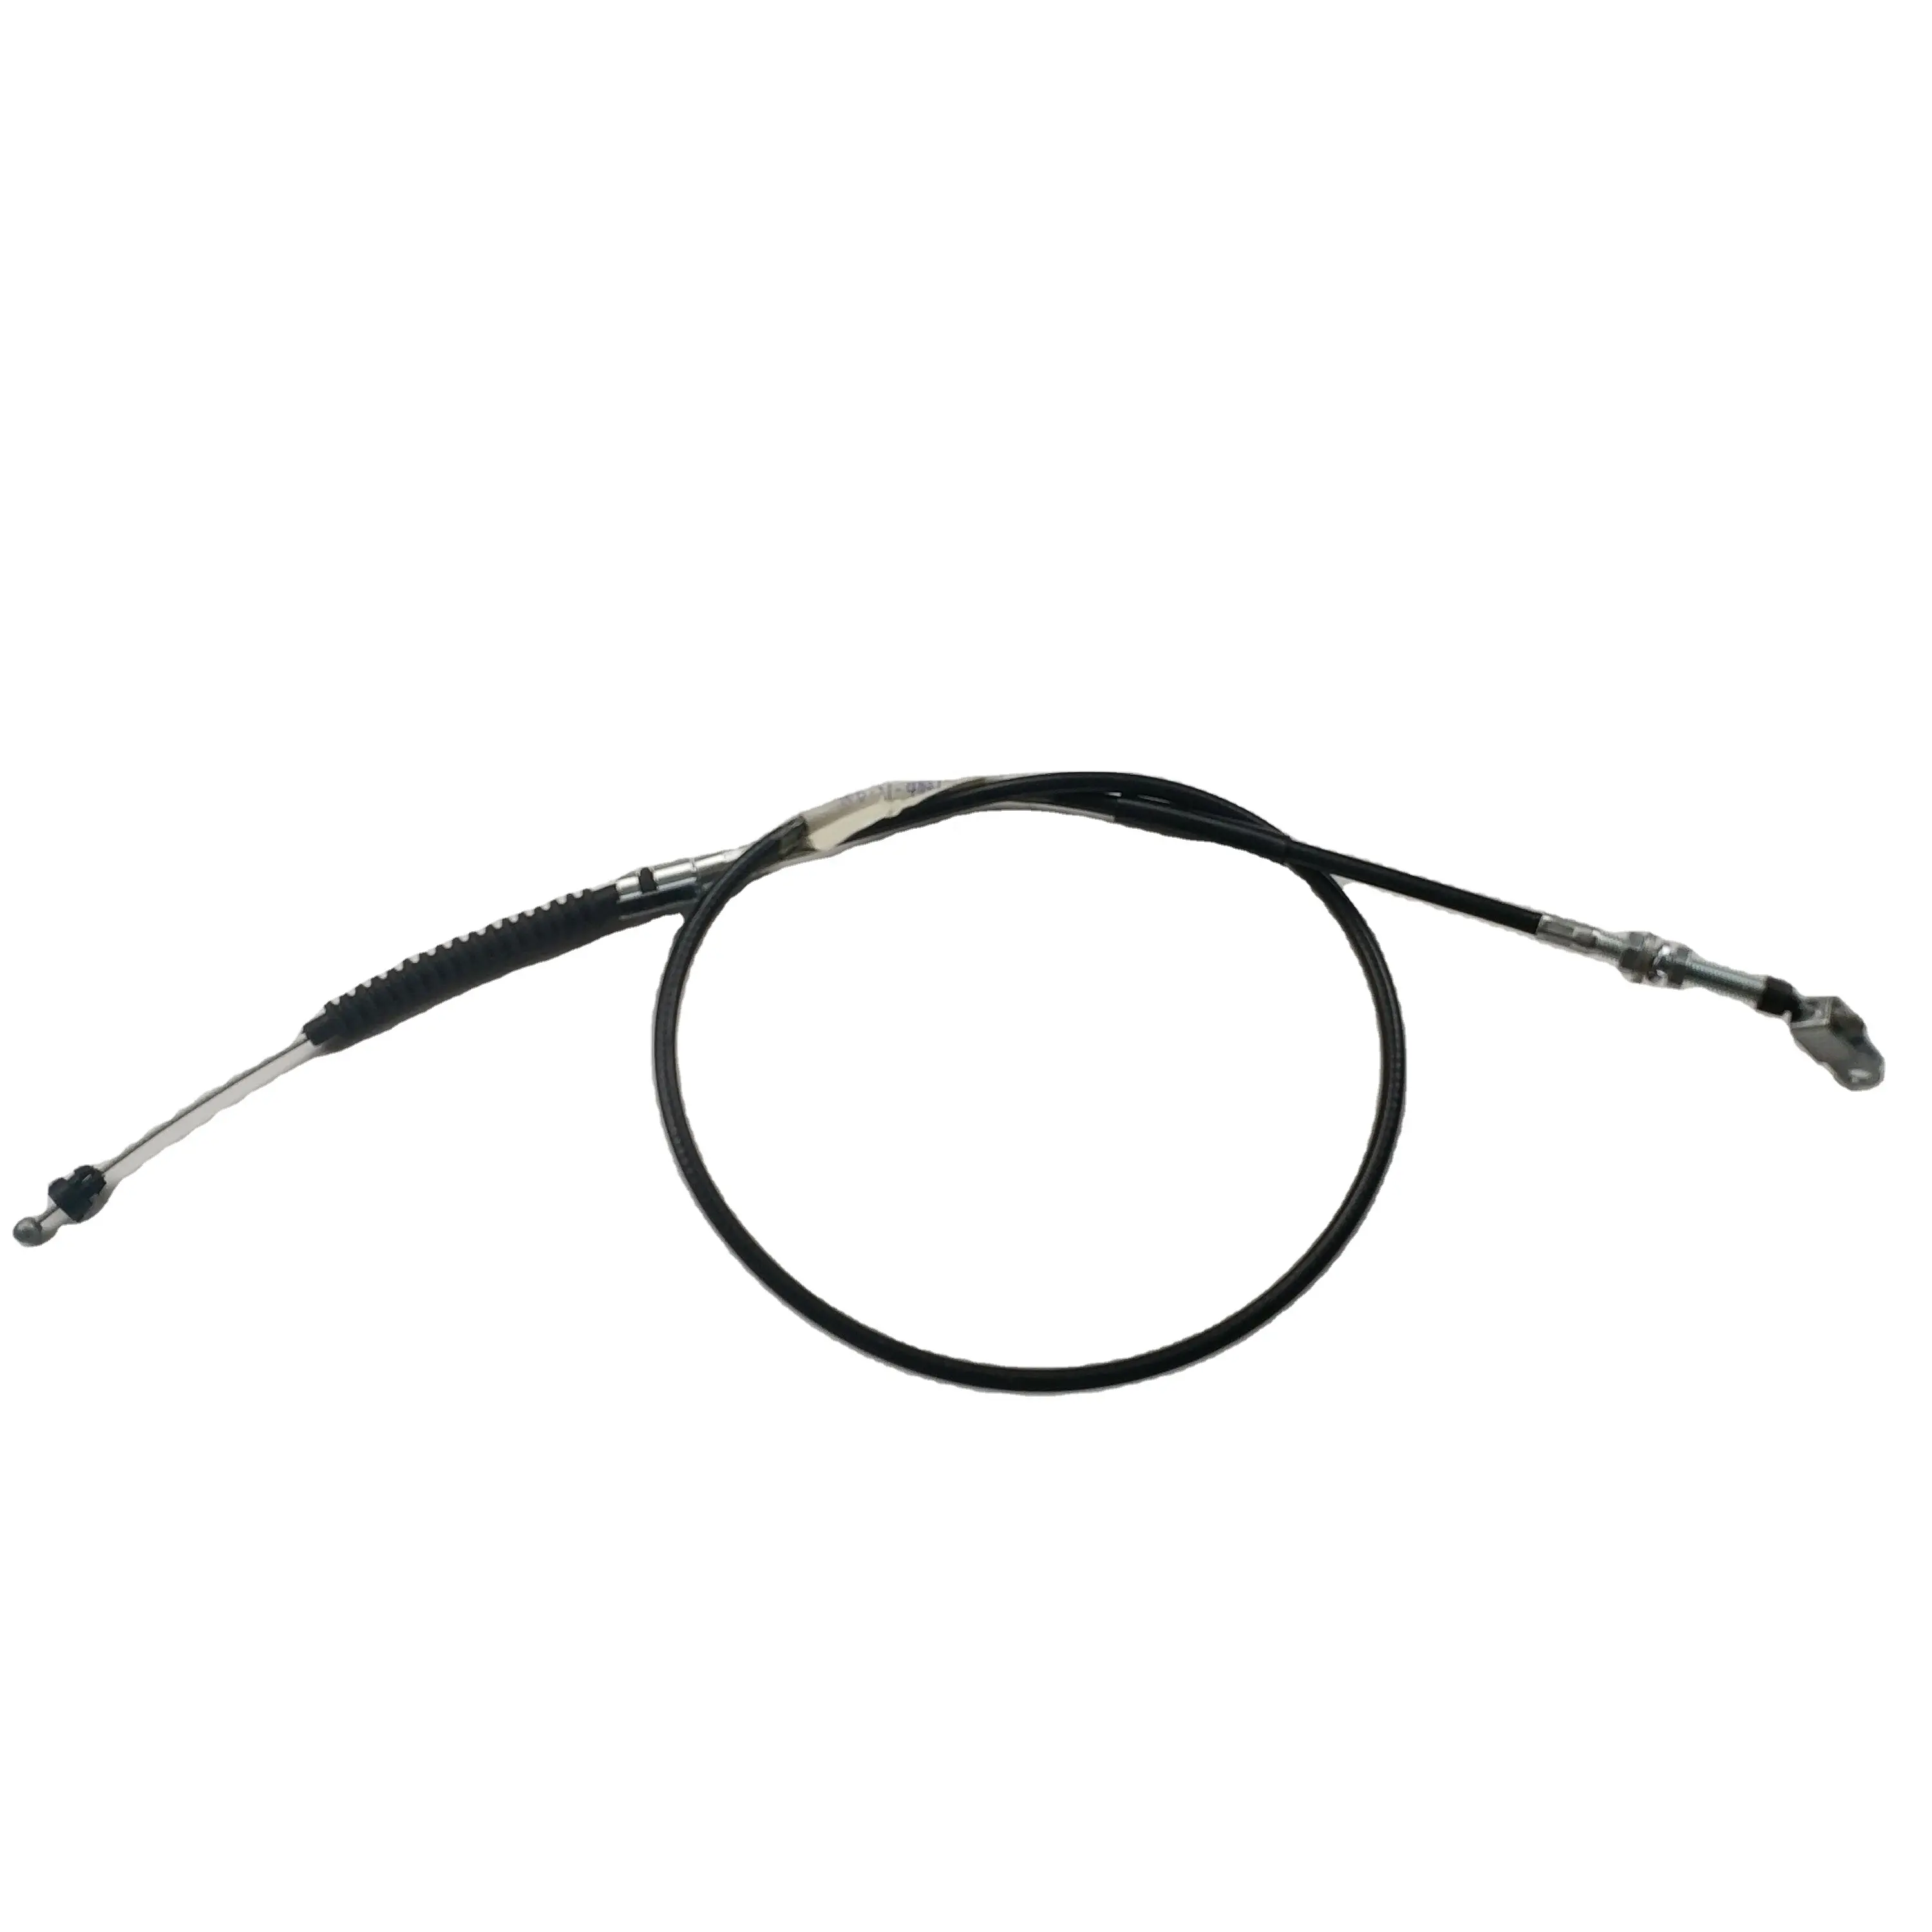 Junxiang cable forklift accelerator cable OEM 3EB-37-13520 with competitive price